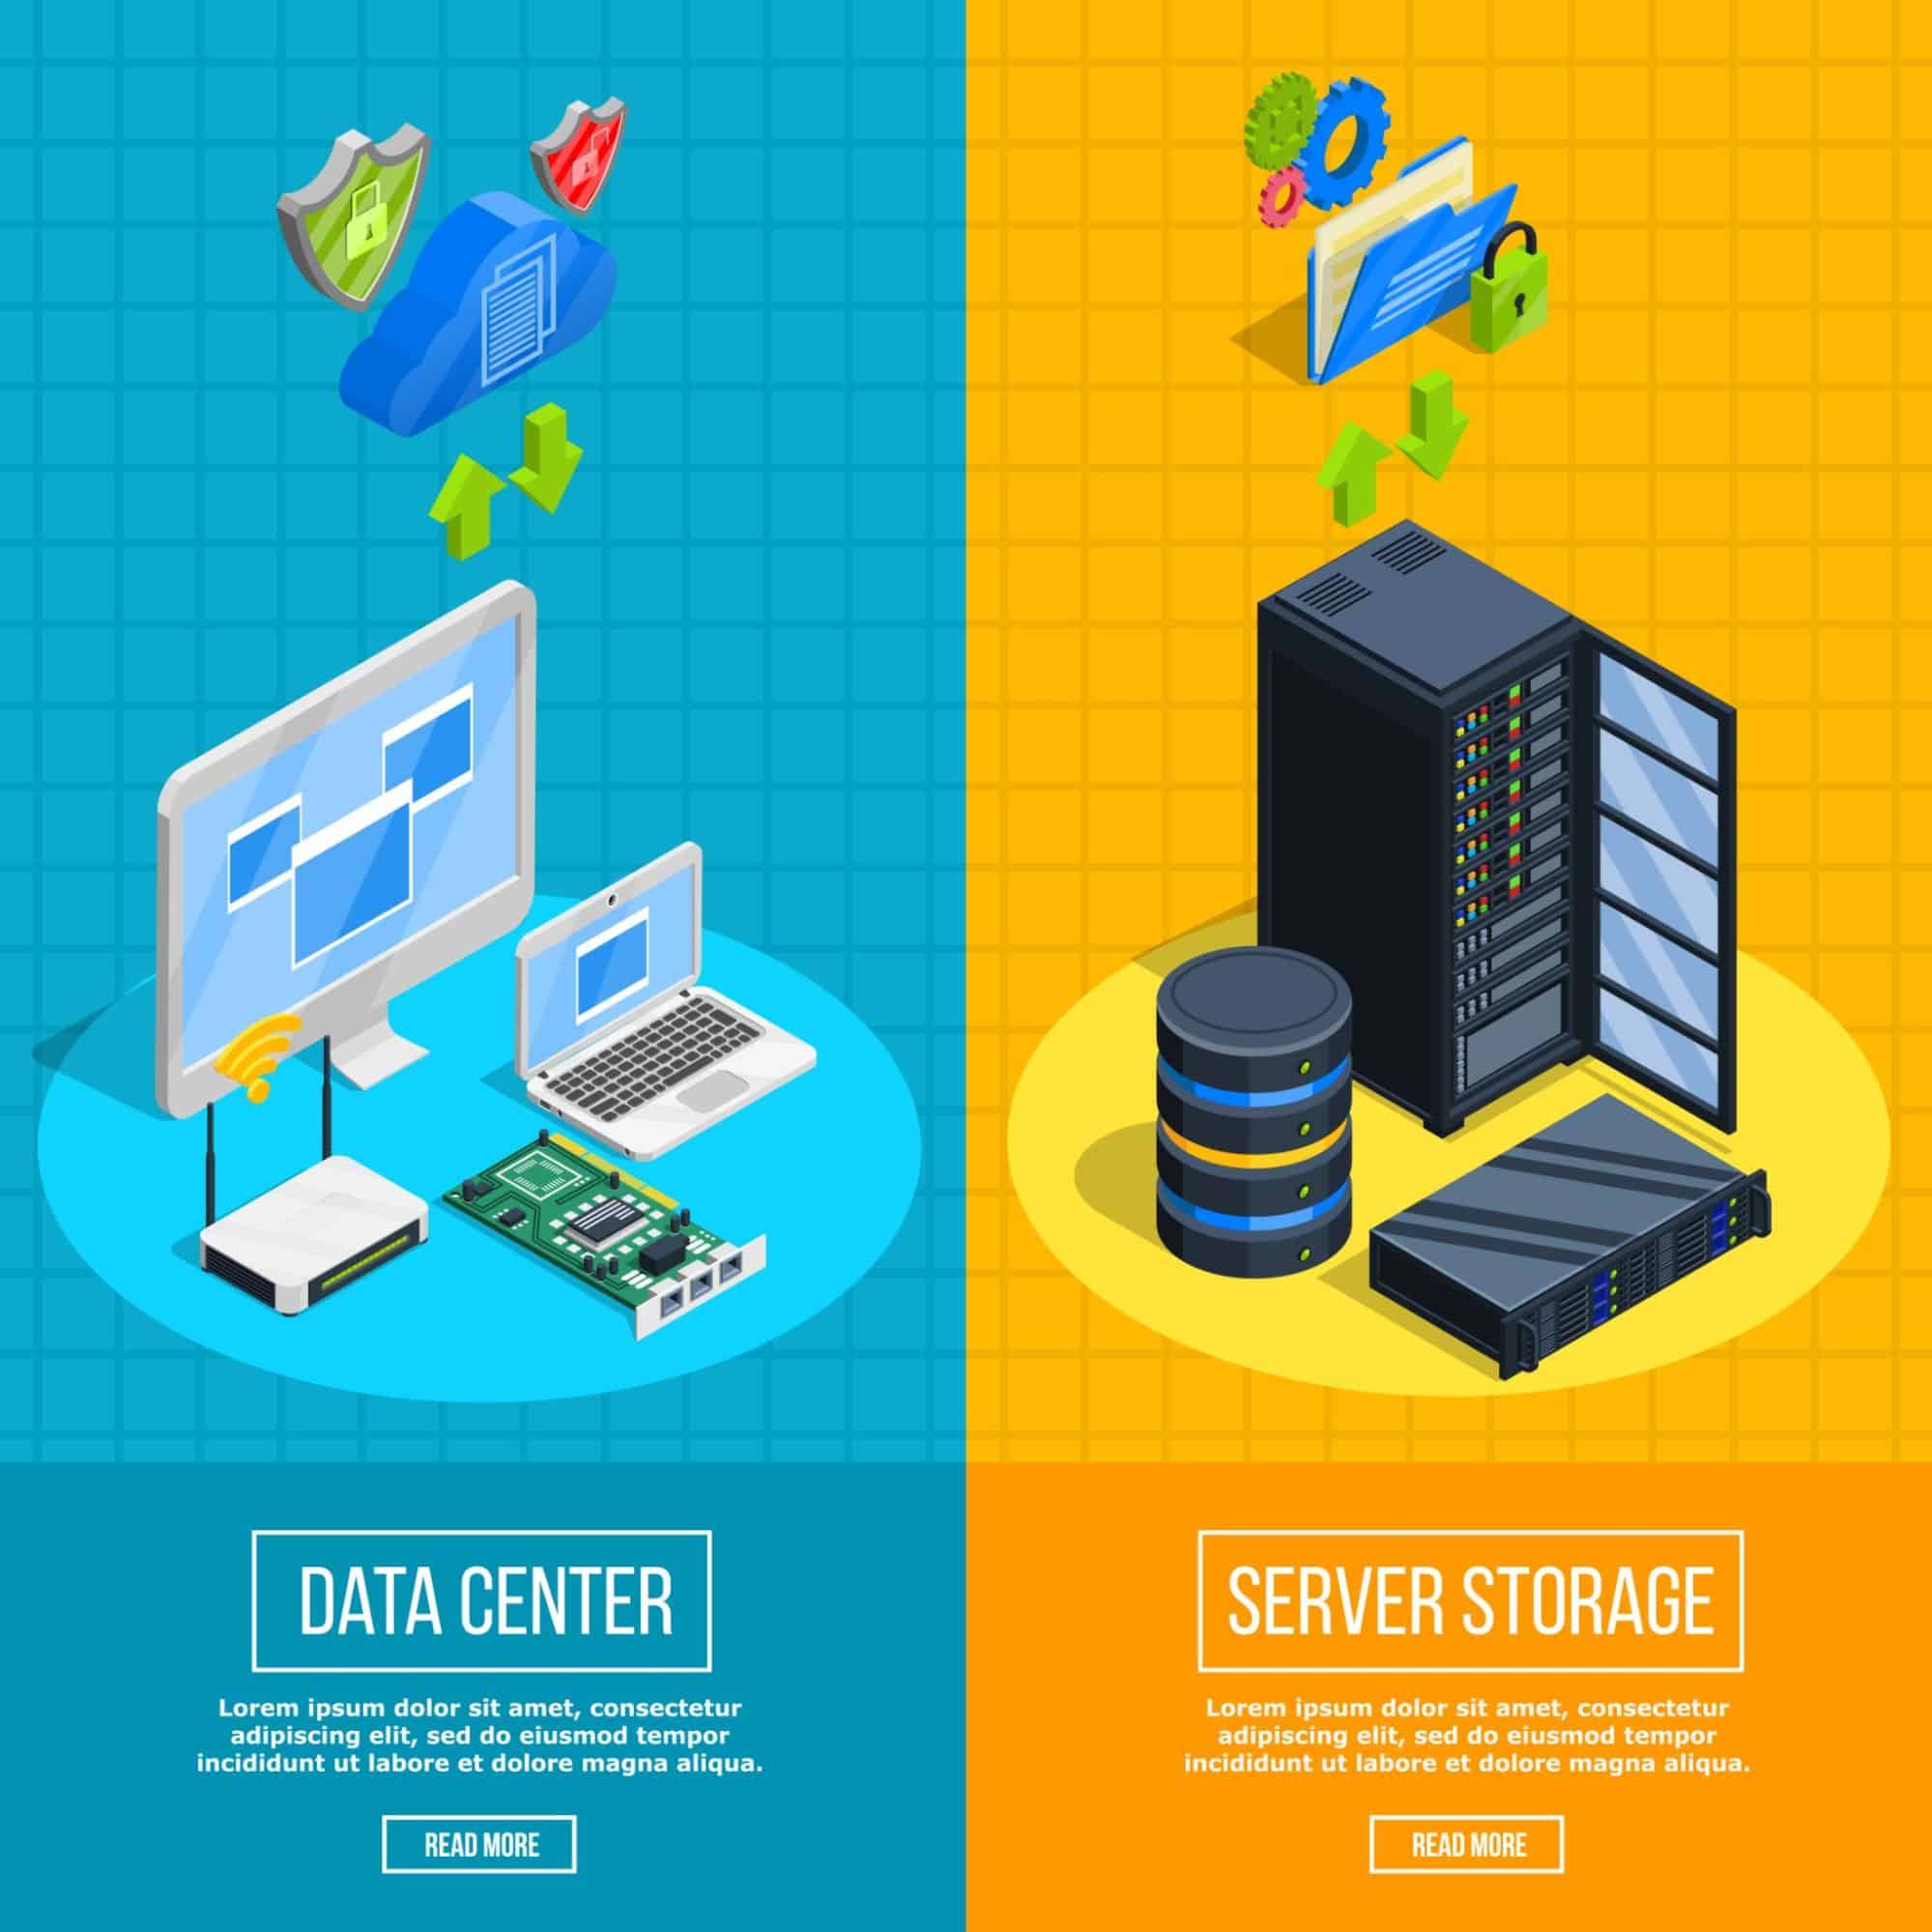 Differences Between a Server and a Dedicated Server